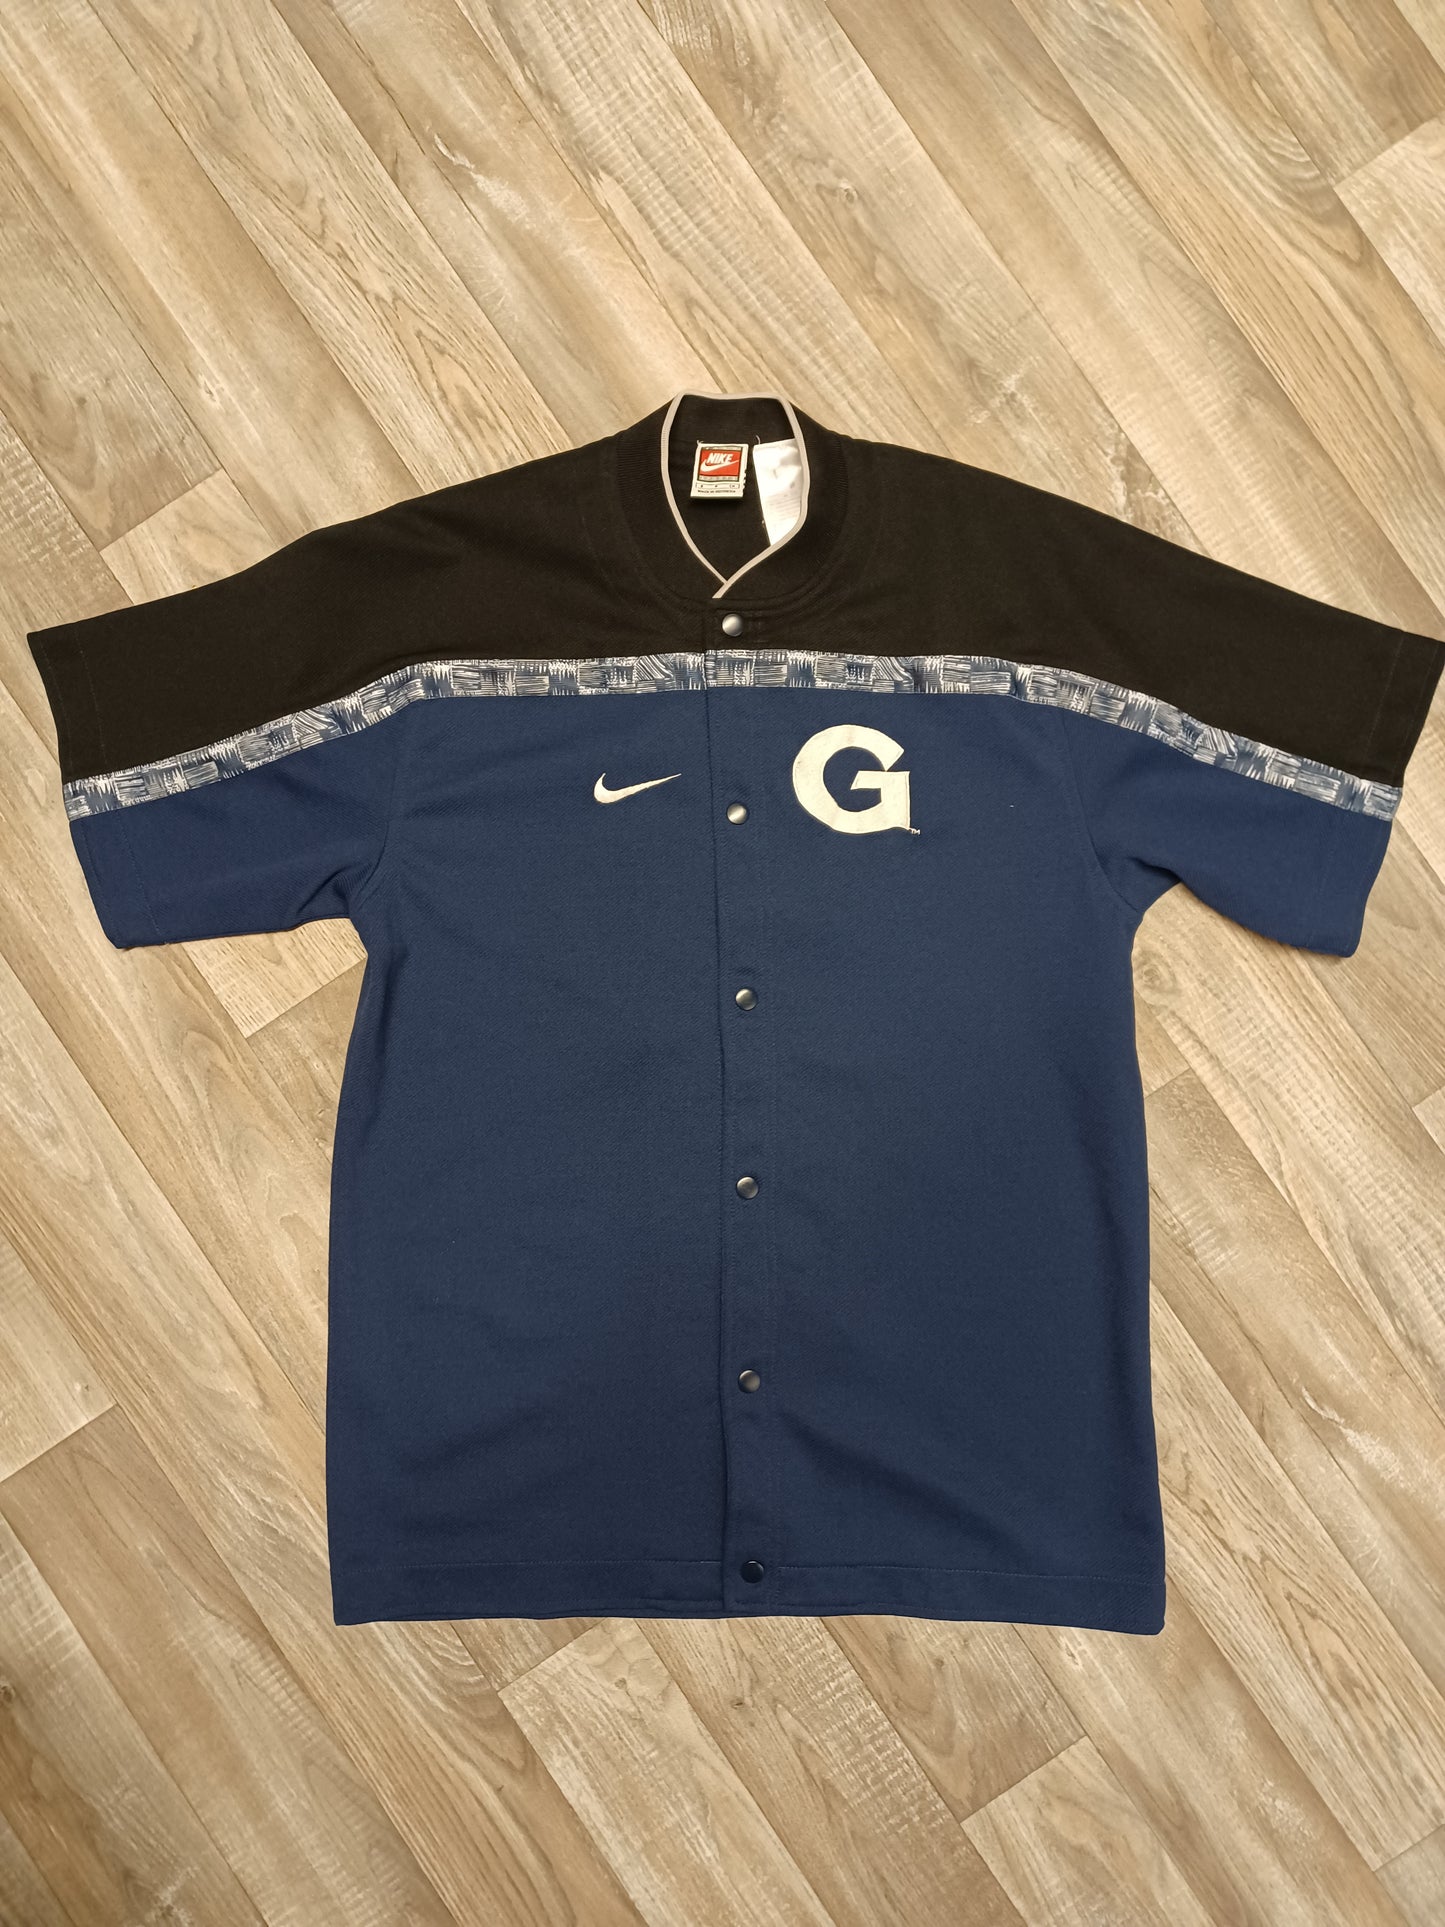 Georgetown Hoyas Warm Up Size Small